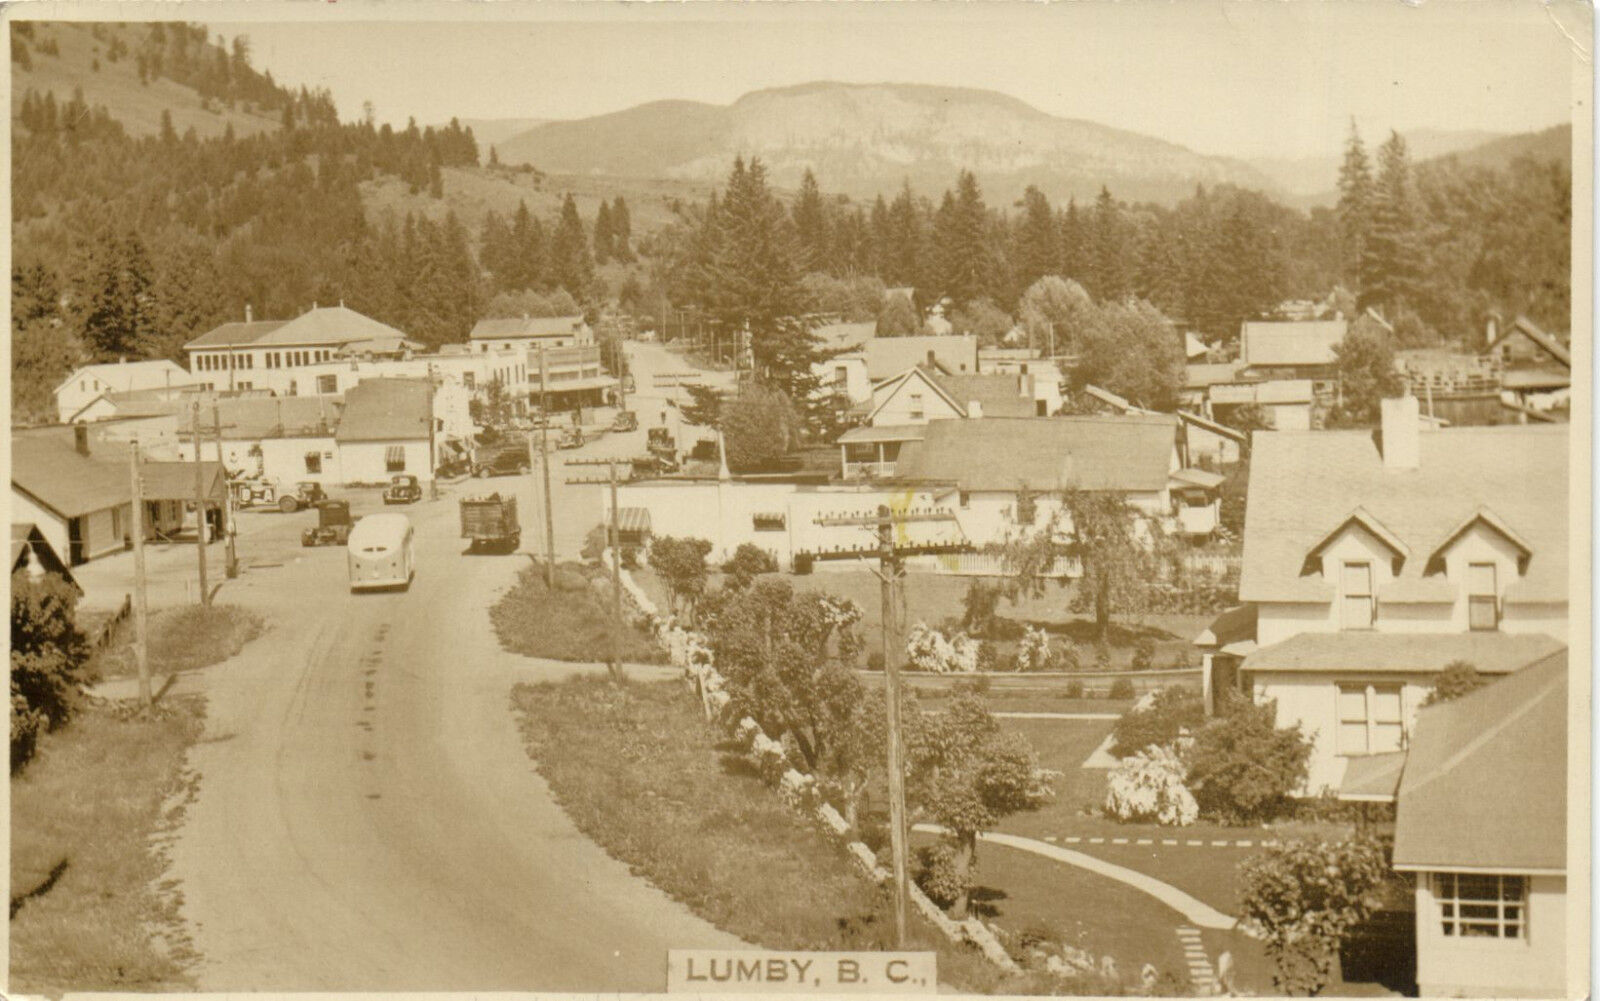 PC CPA CANADA, LUMBY, B.C. , TOWN VIEW, VINTAGE REAL PHOTO POSTCARD (b6292)